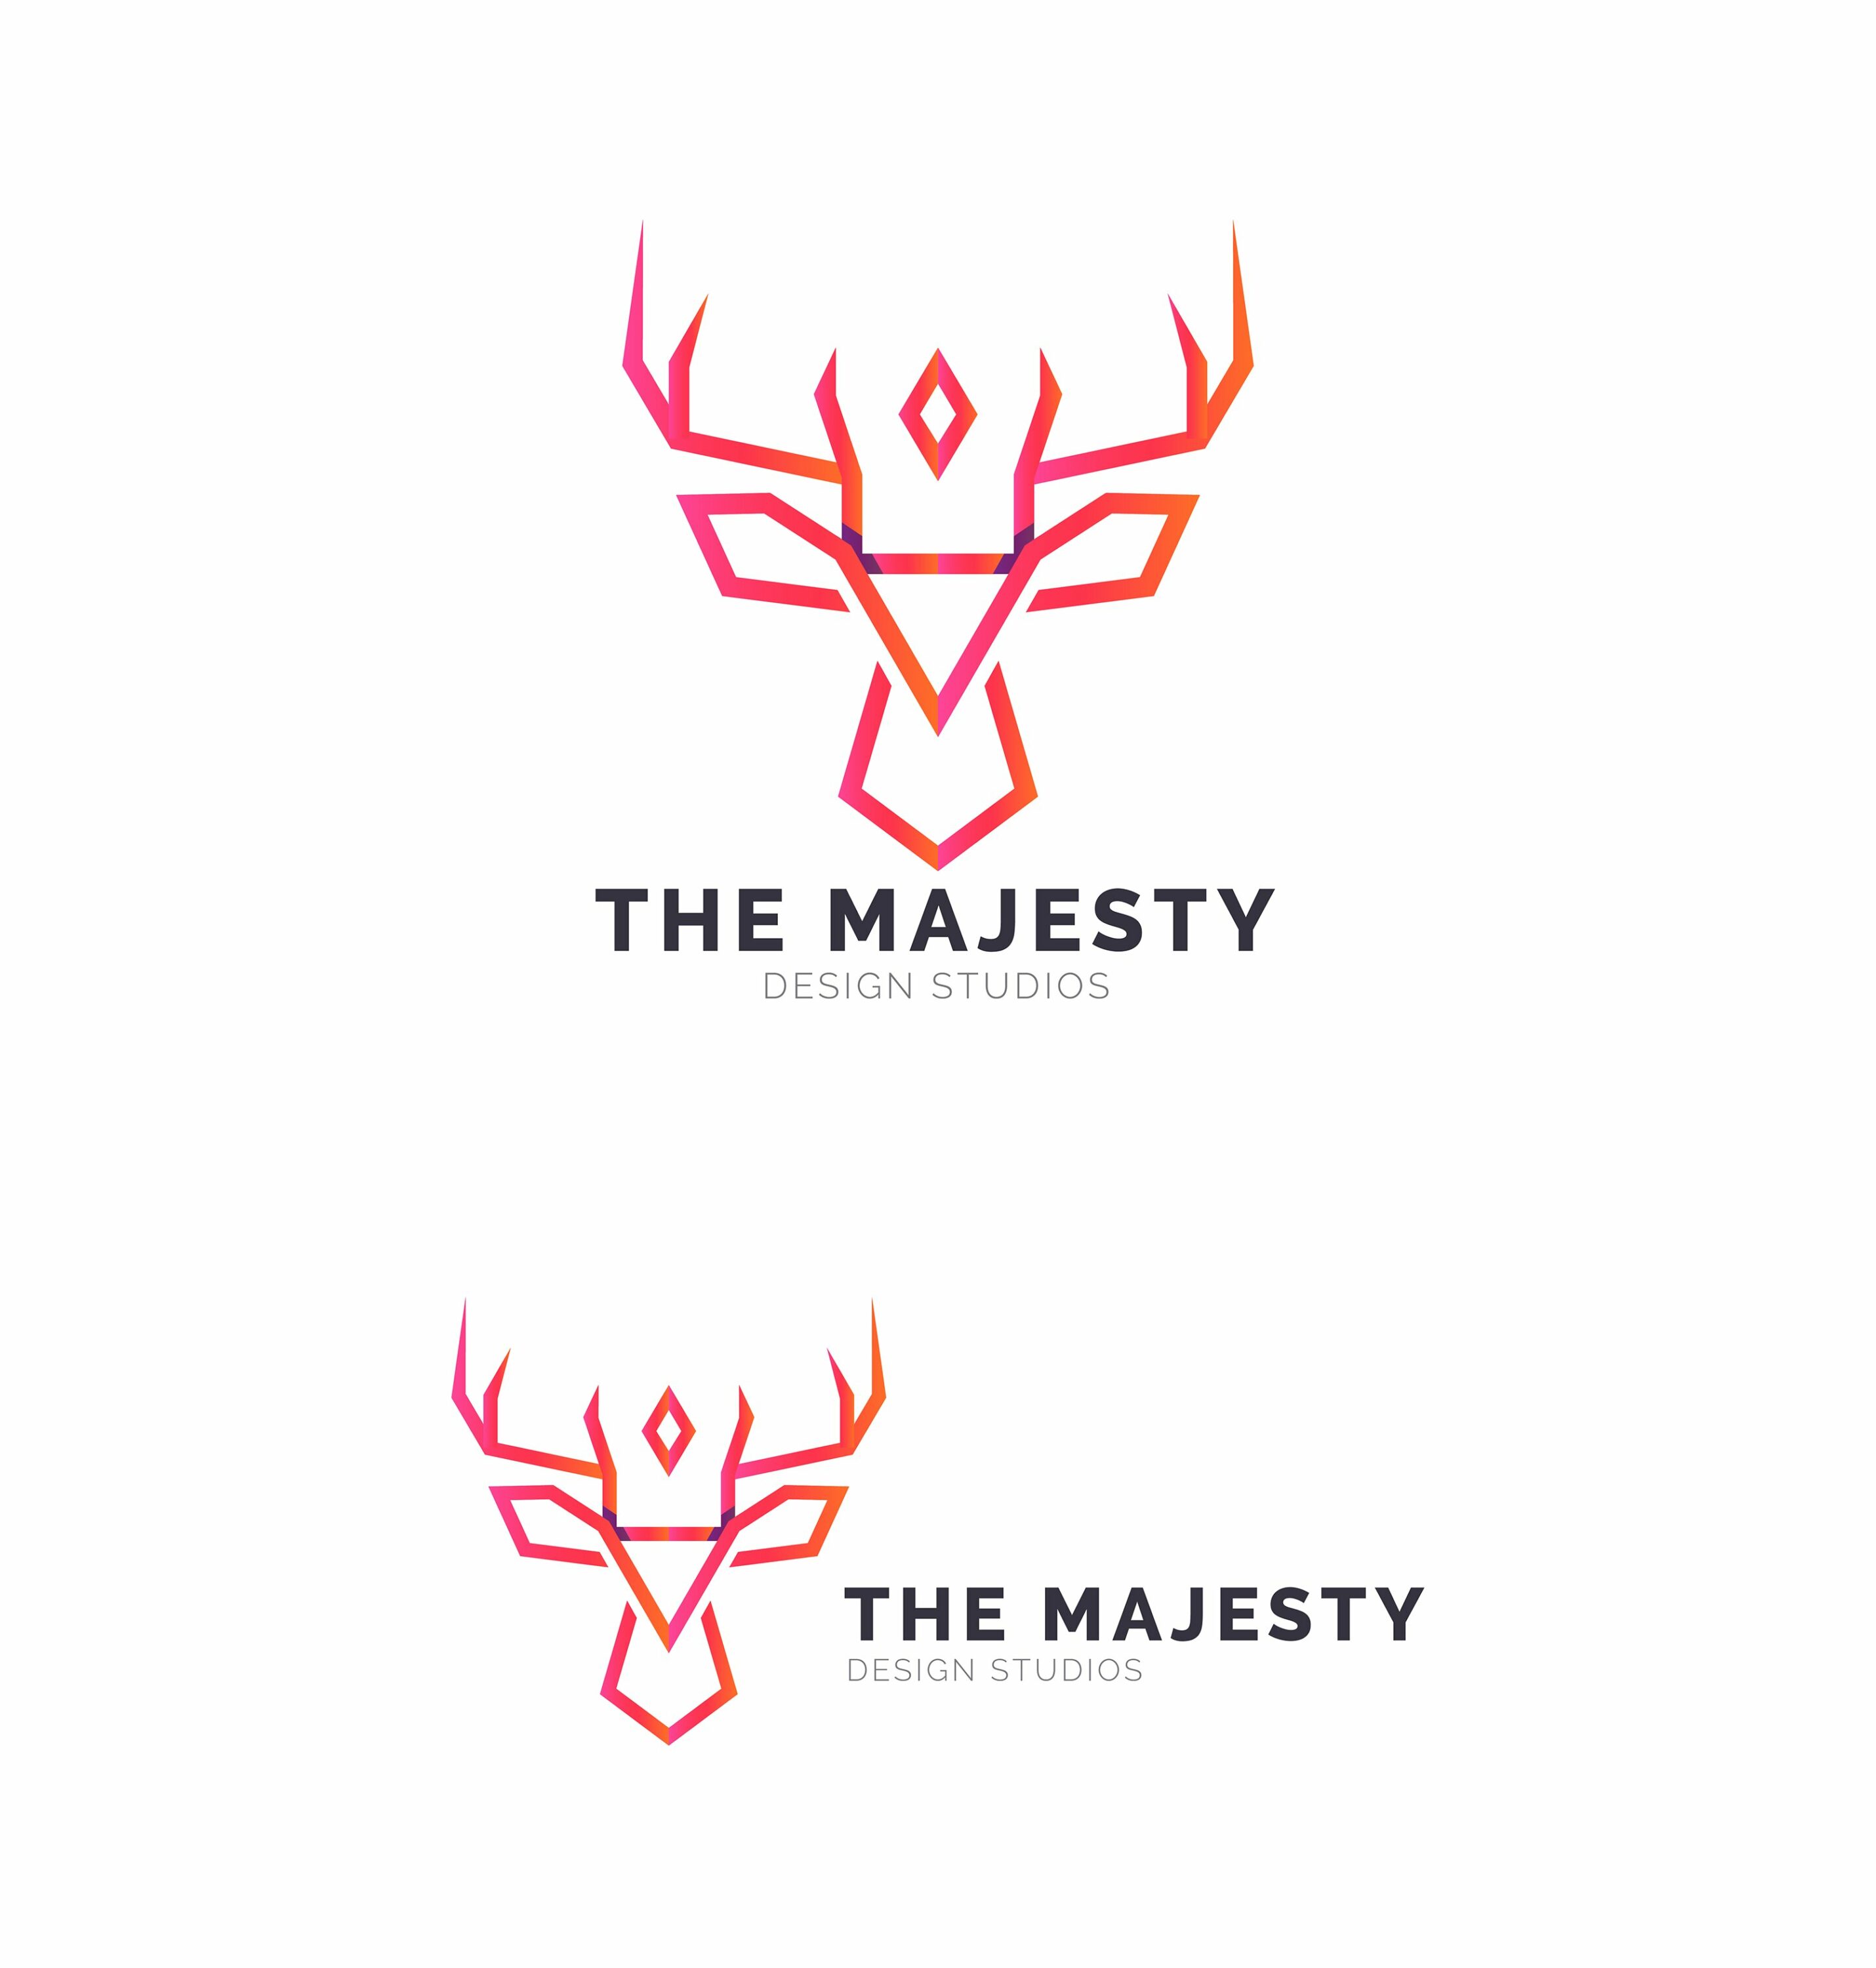 White background with luxury red deer logo.